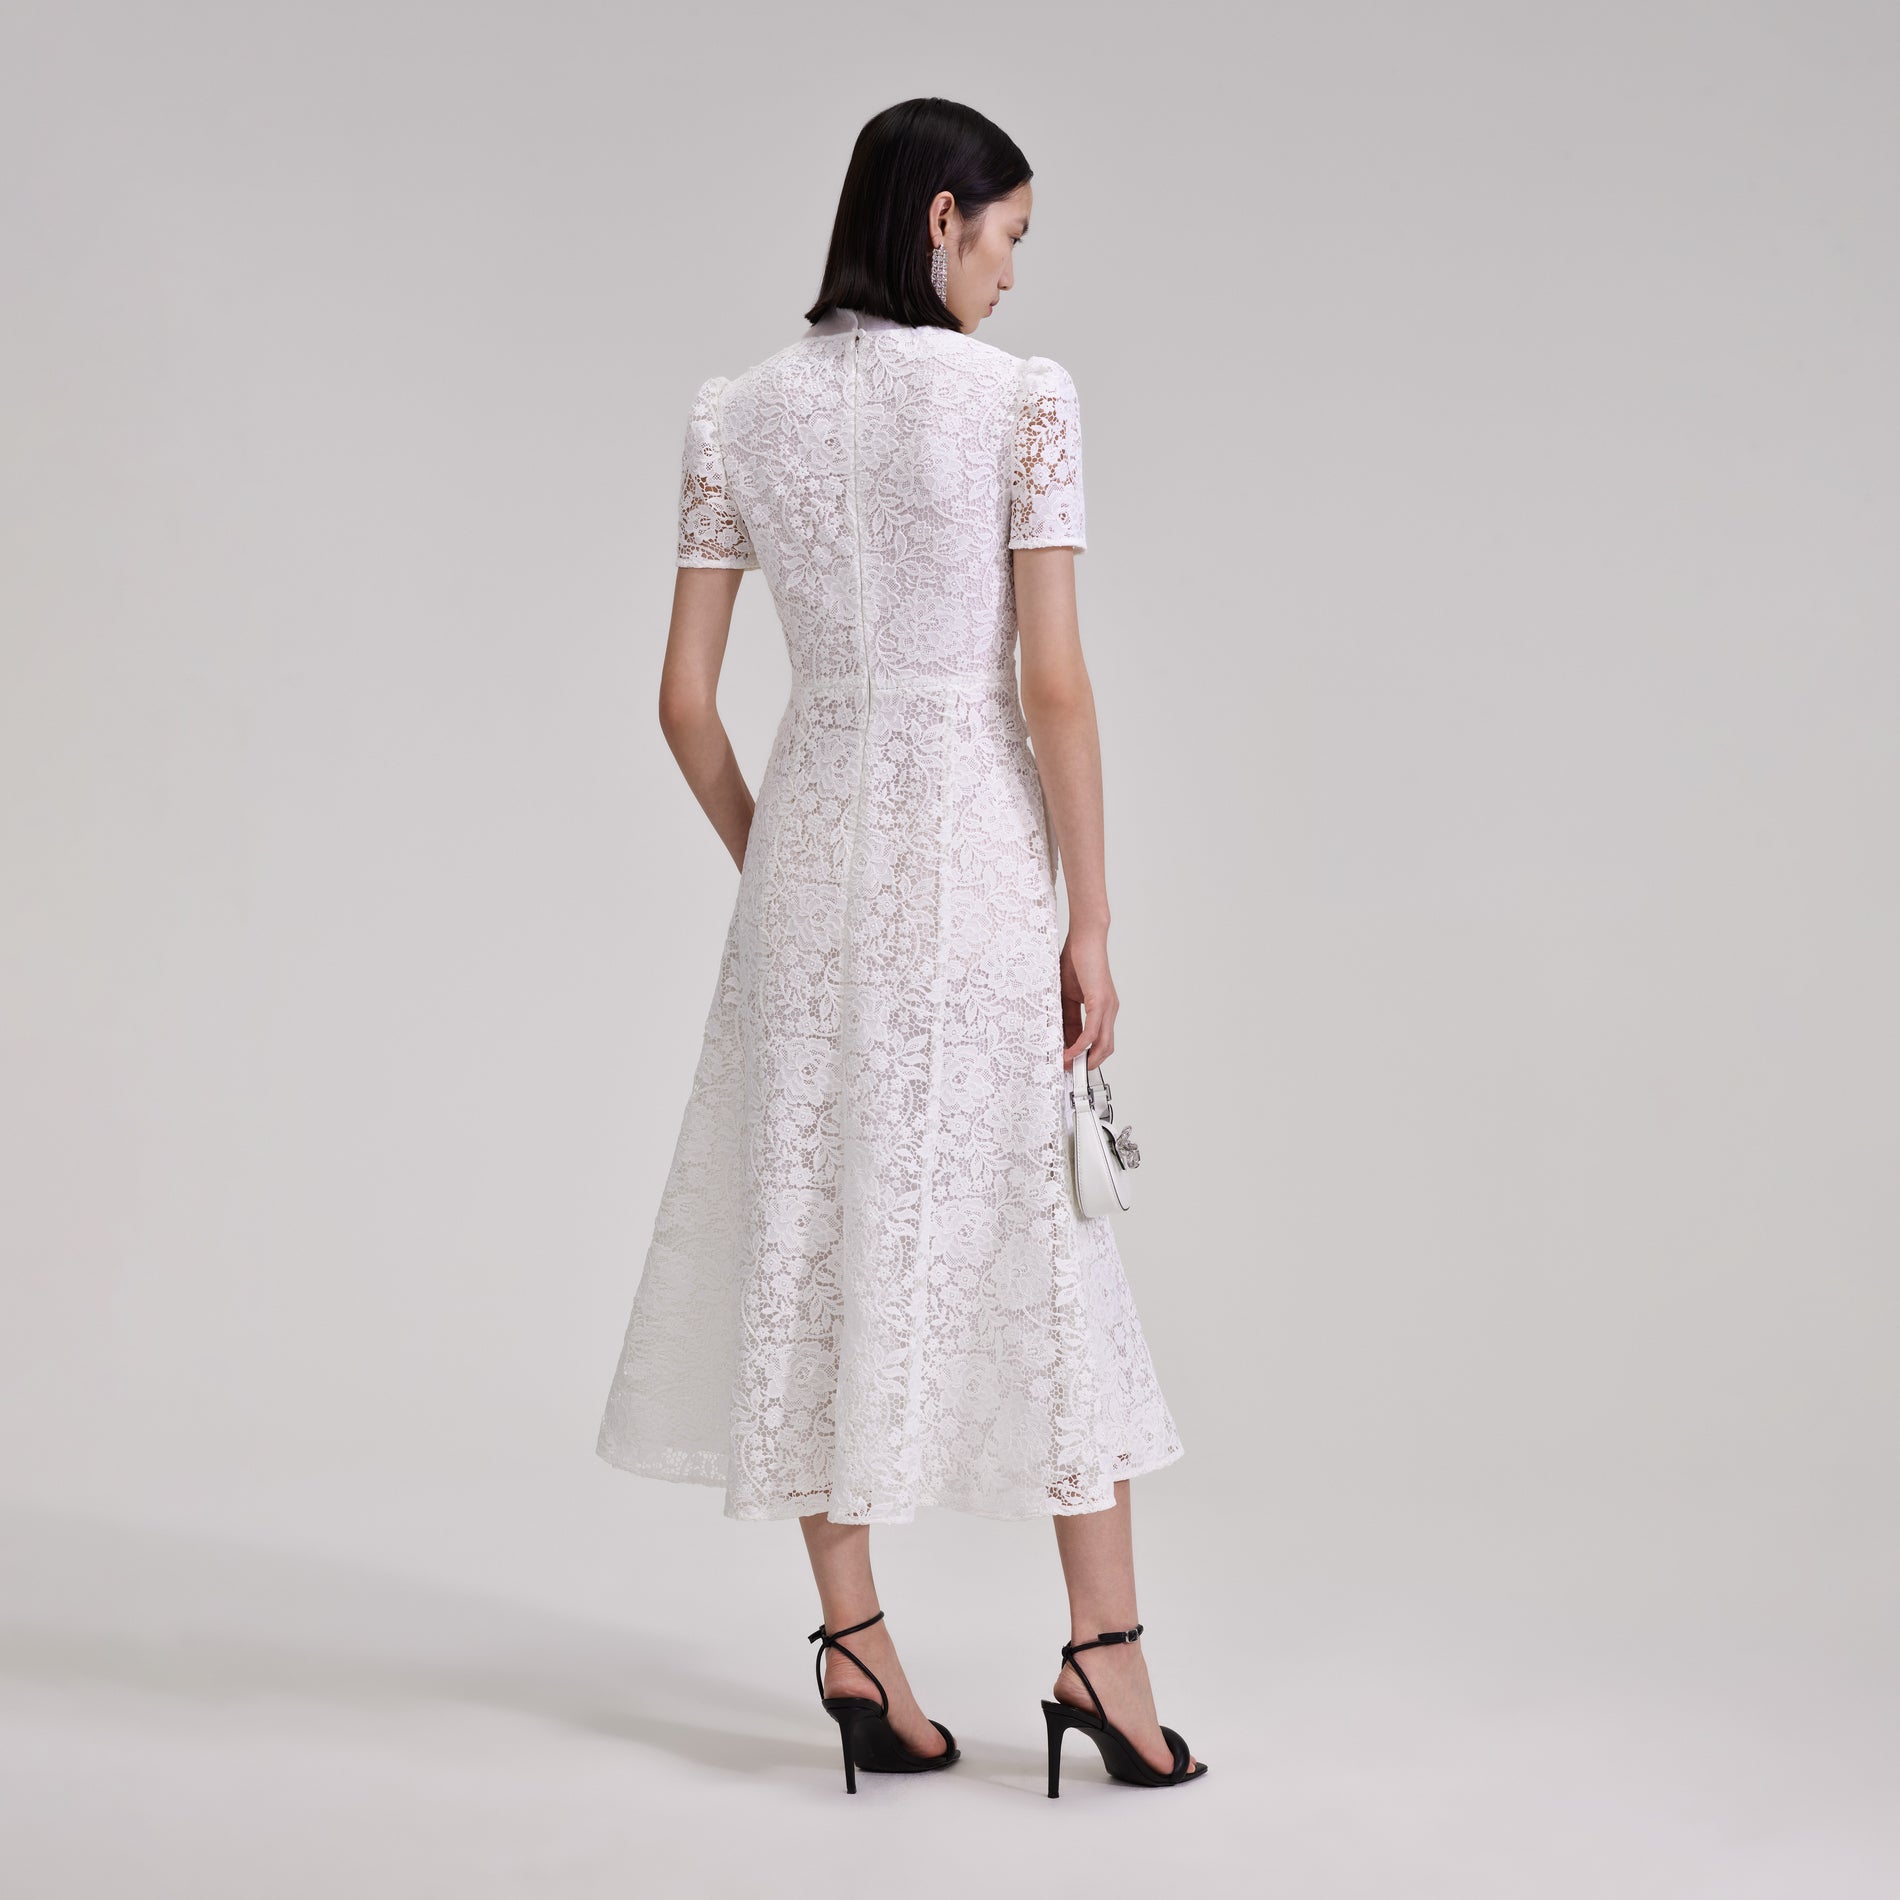 A woman wearing the White Cord Lace Crossover Midi Dress